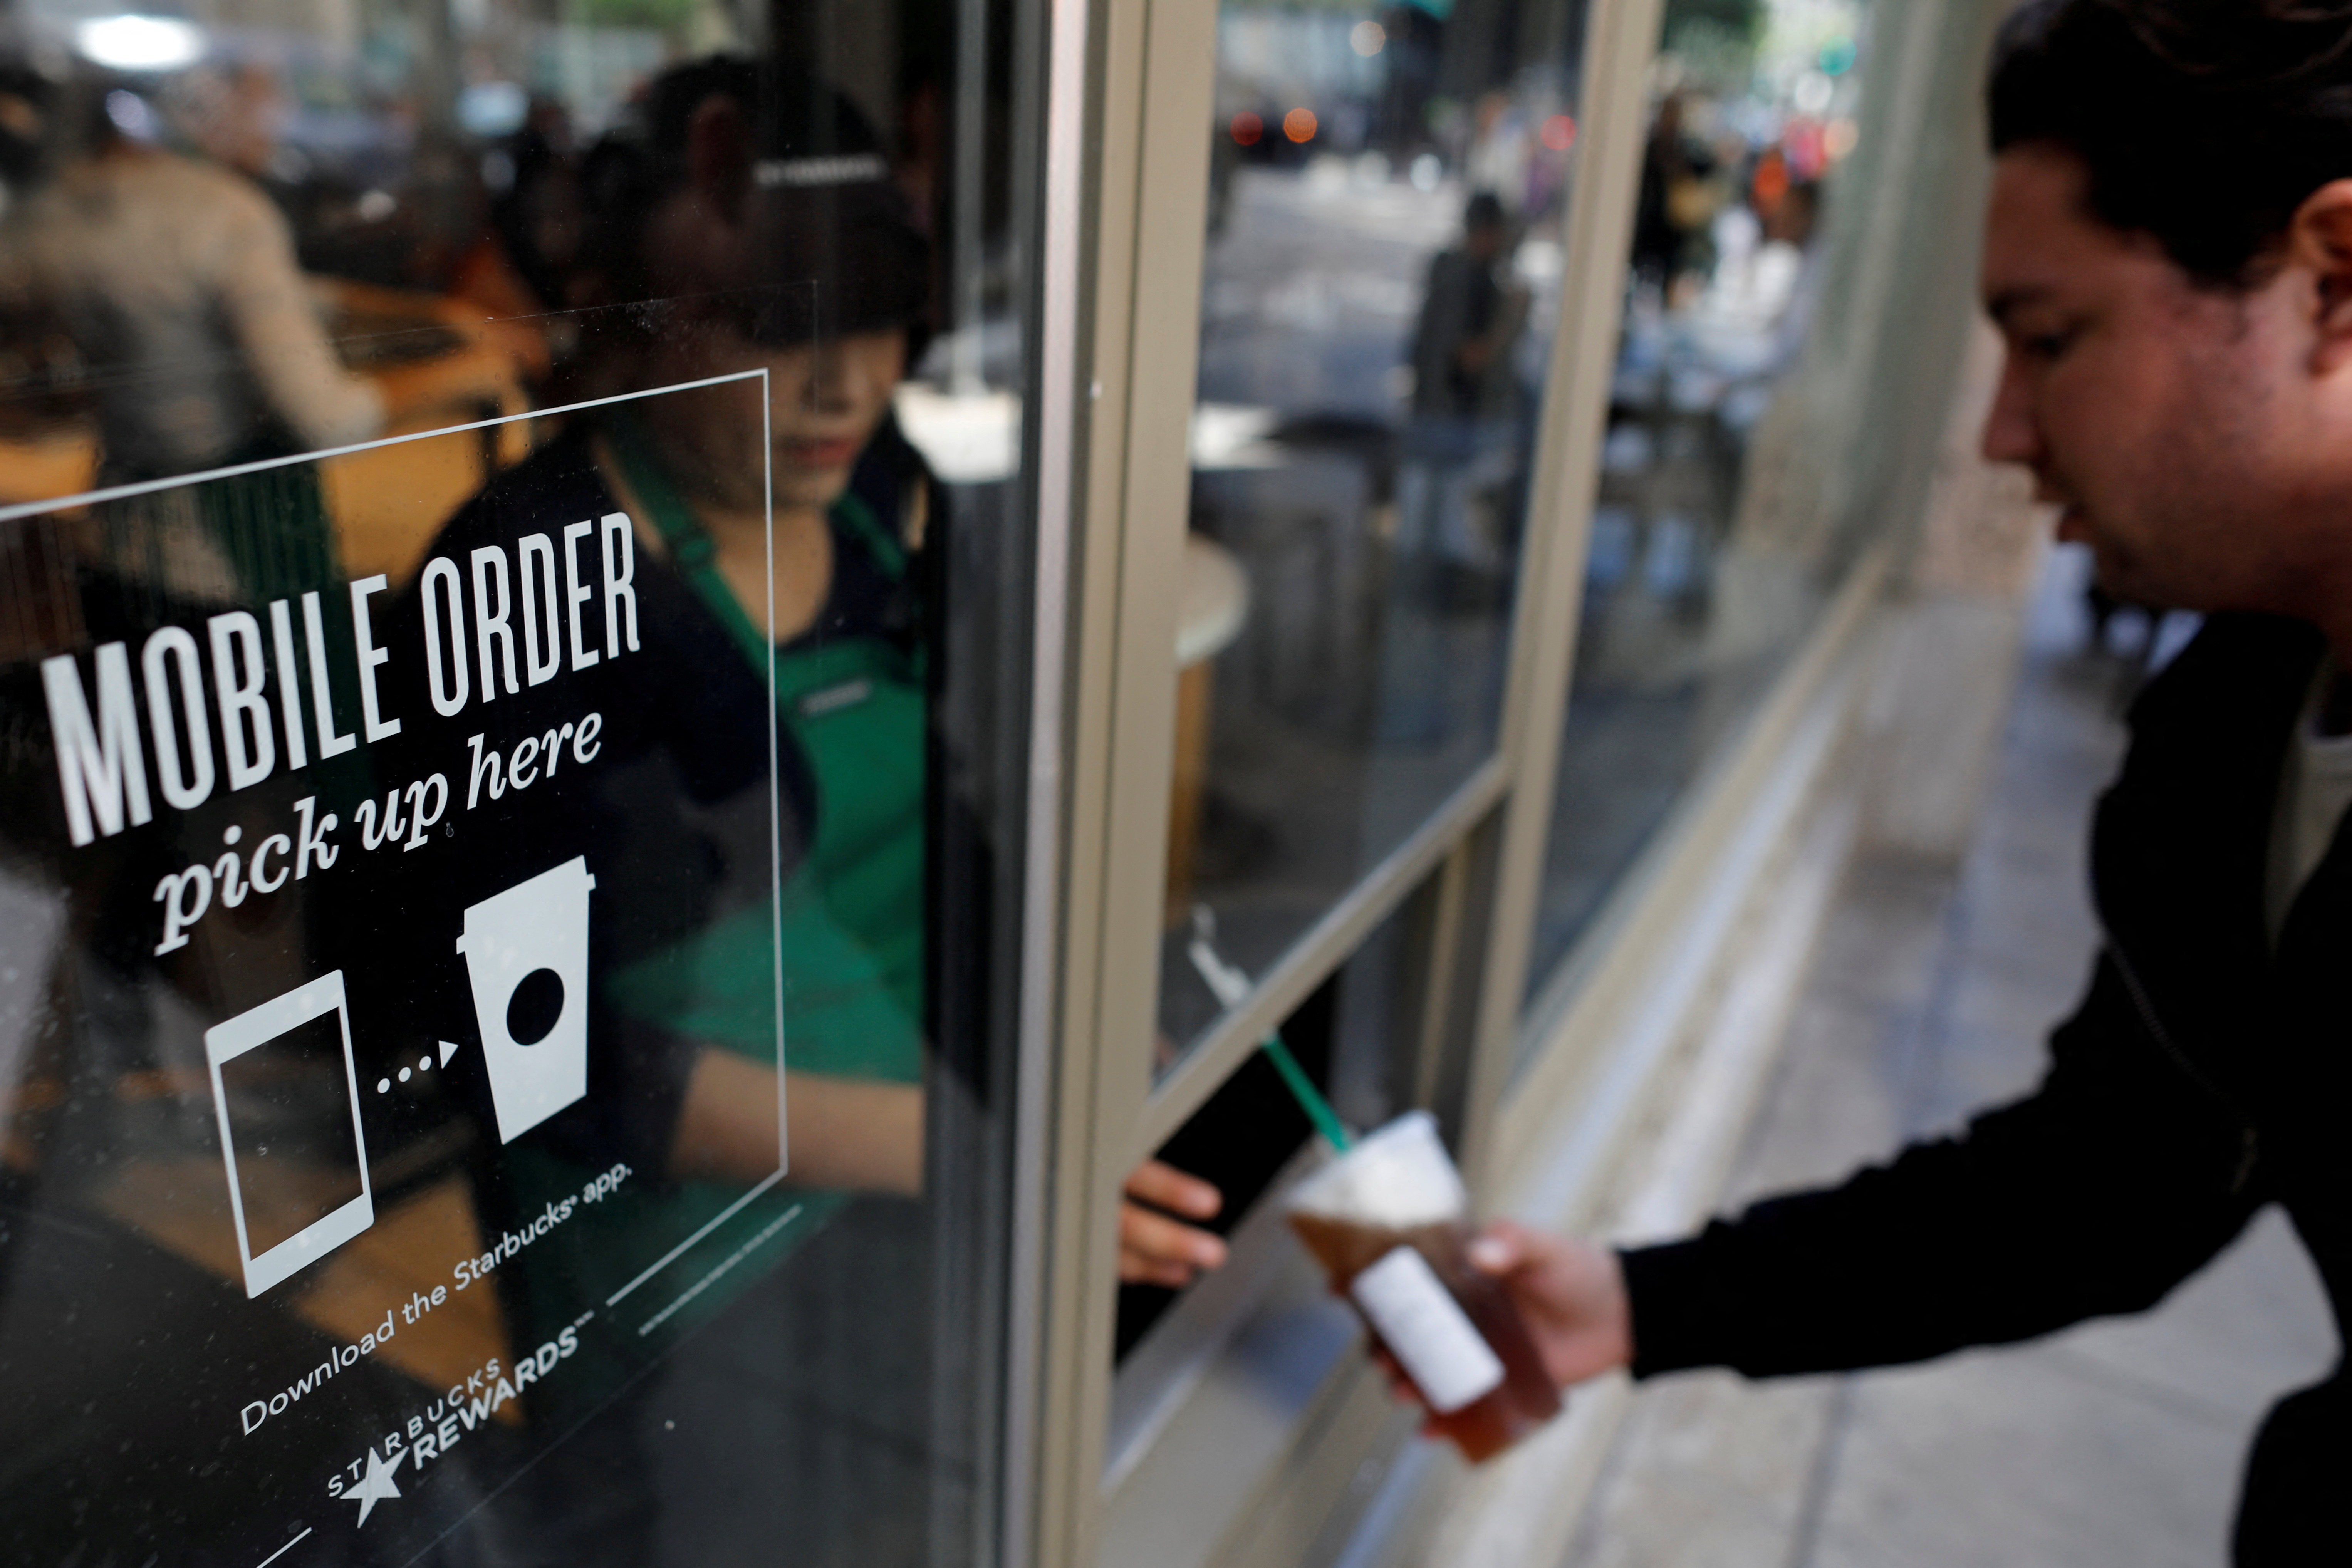 Starbucks, Taco Bell, McDonald's reinventing drive-thru with technology